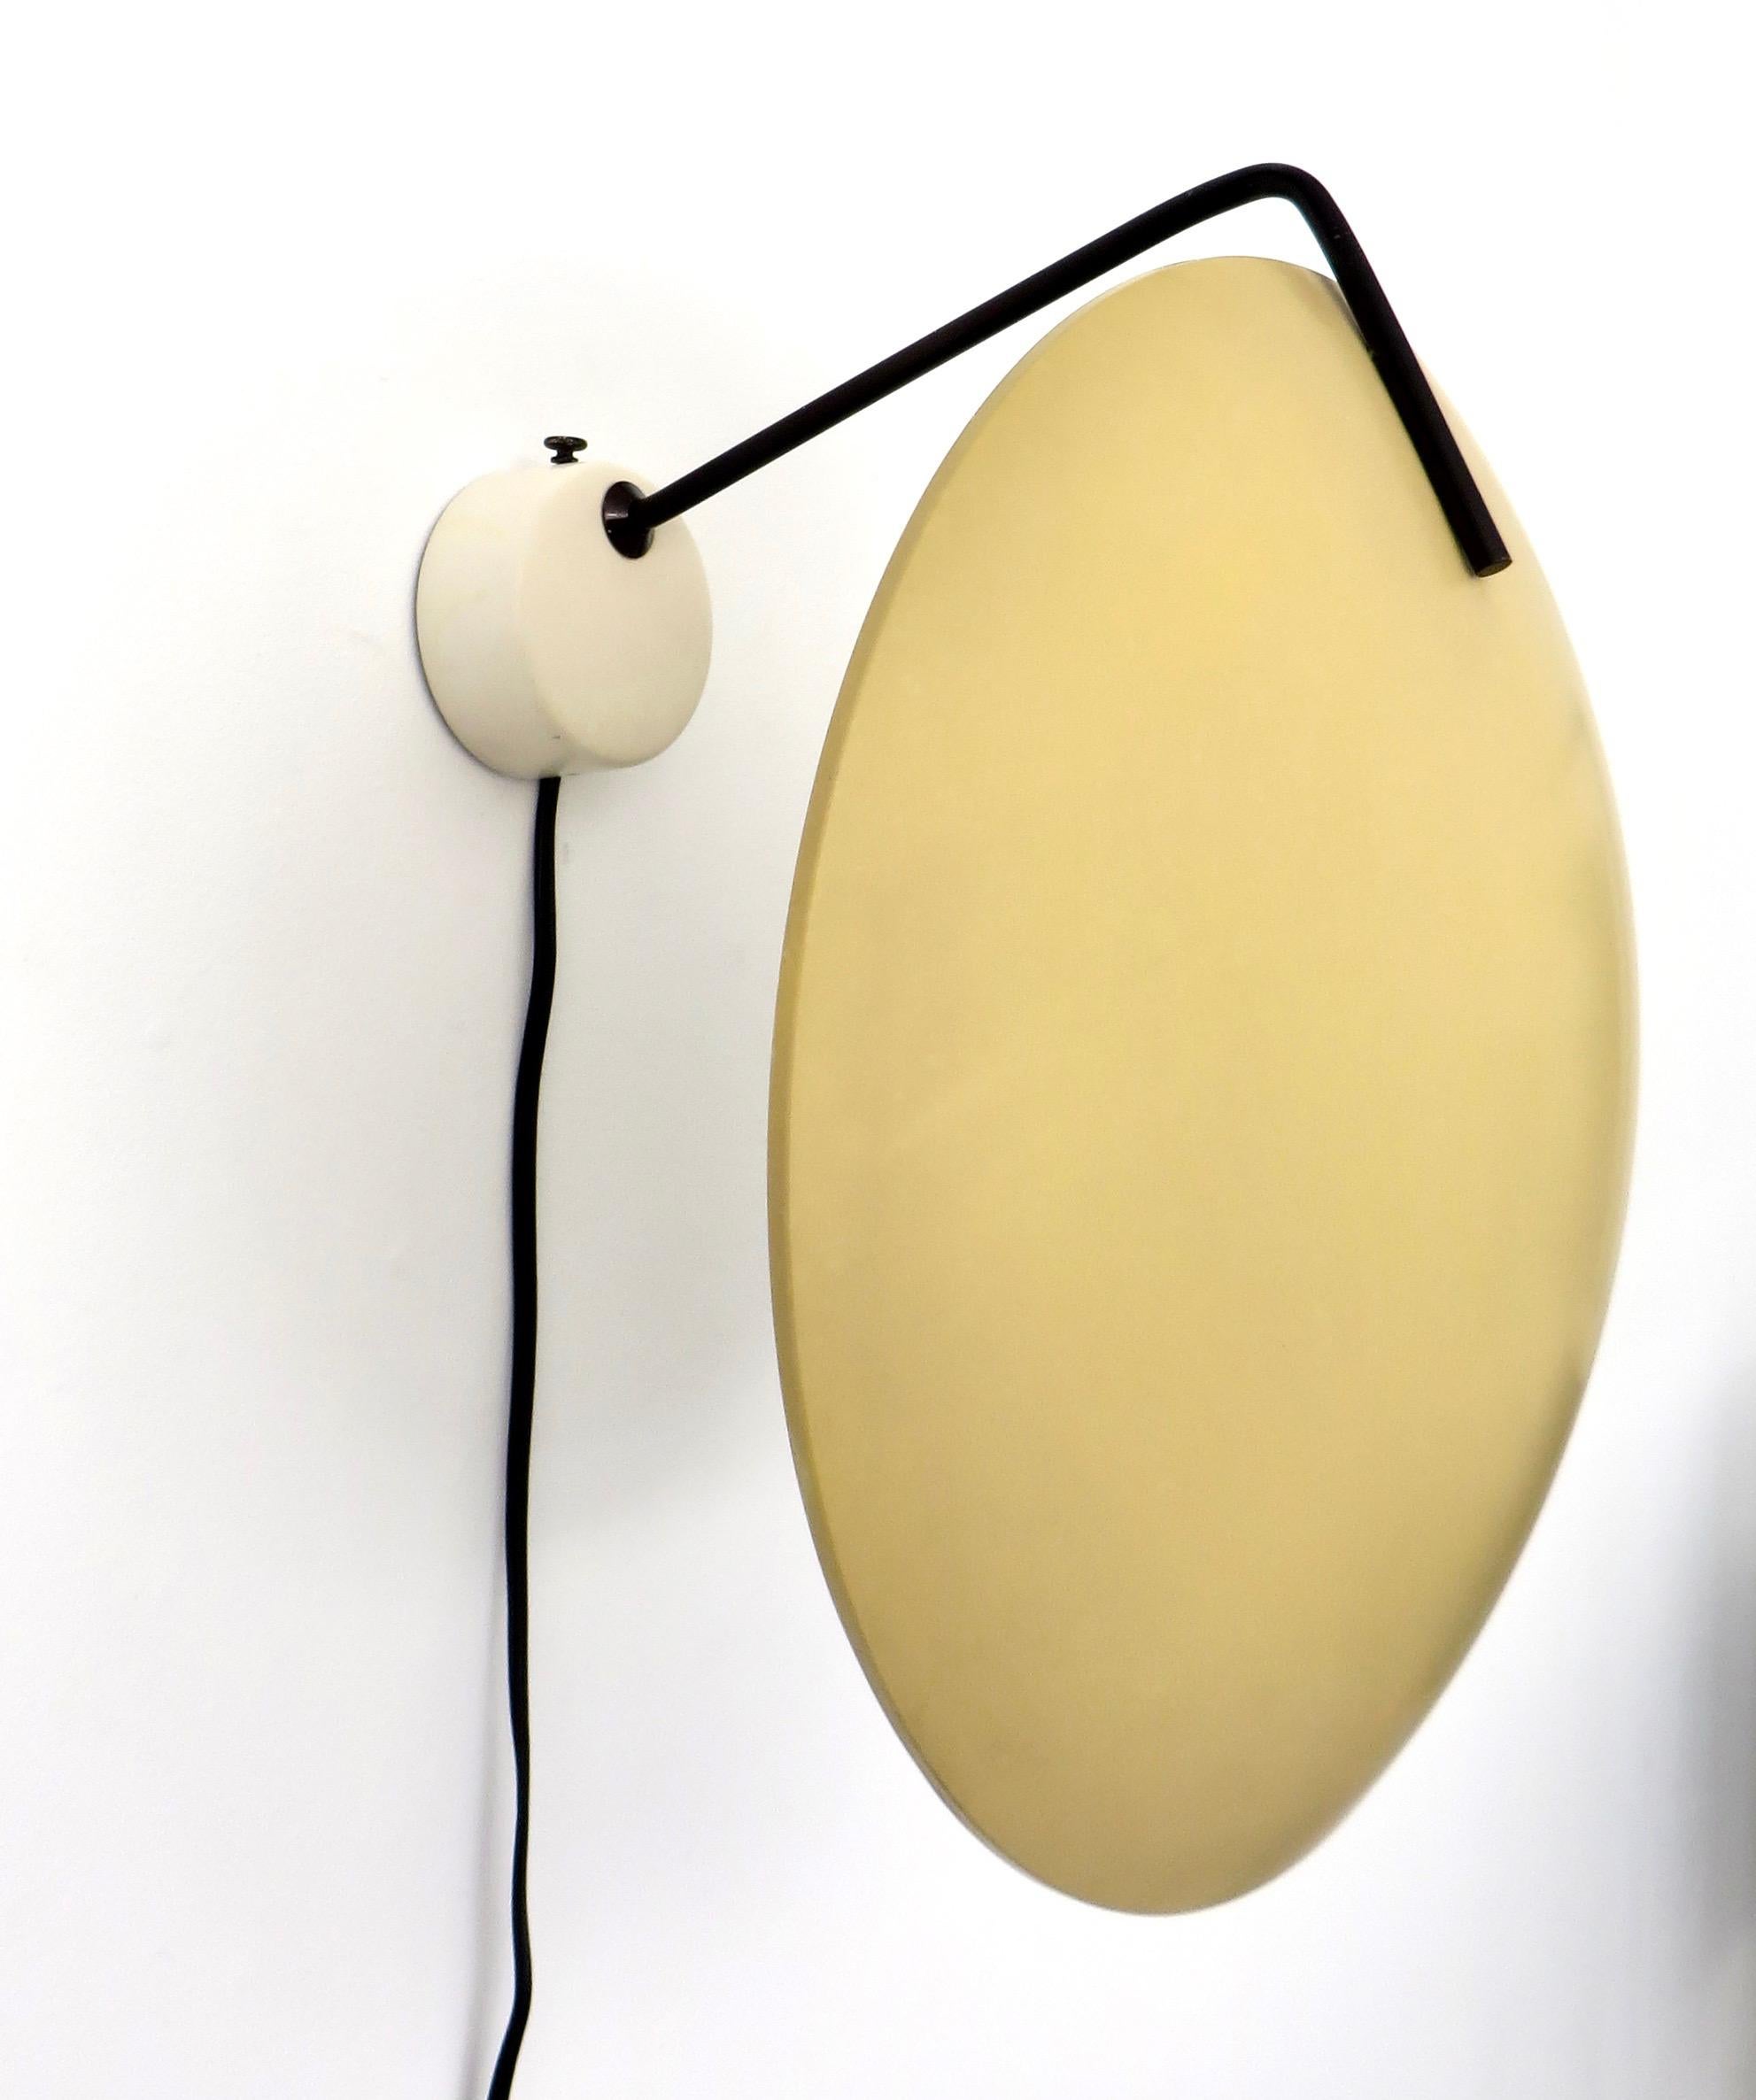 Stilnovo wall lamp model 232 by Bruno Gatta, Italy 1962
Very nice wall or ceiling lamp model 232, designed by Bruno Gatta for Stilnovo, Italy in 1962. These lamps are often sold as Sarfatti but we have these lamp documented as a design by B. Gatta